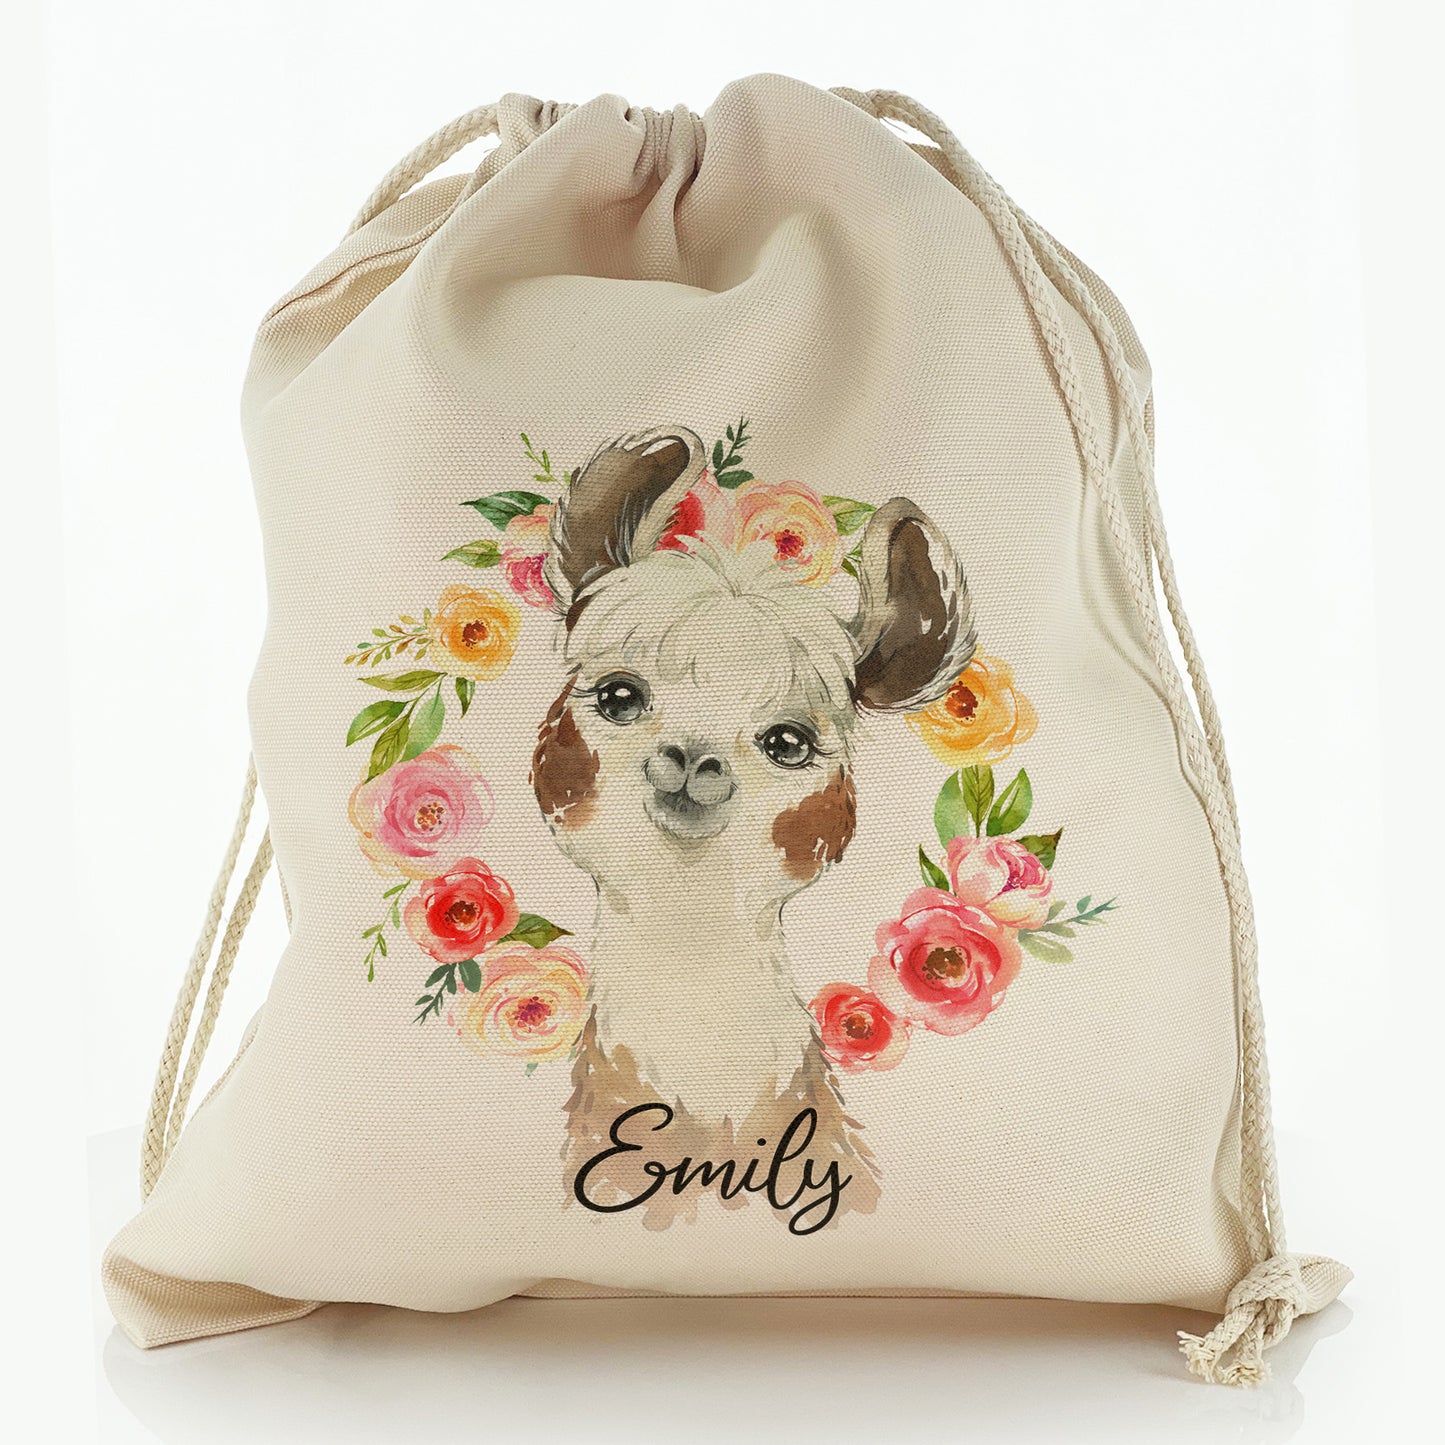 Personalised Canvas Sack with Brown and White Alpaca Multicolour Flower Wreath and Cute Text